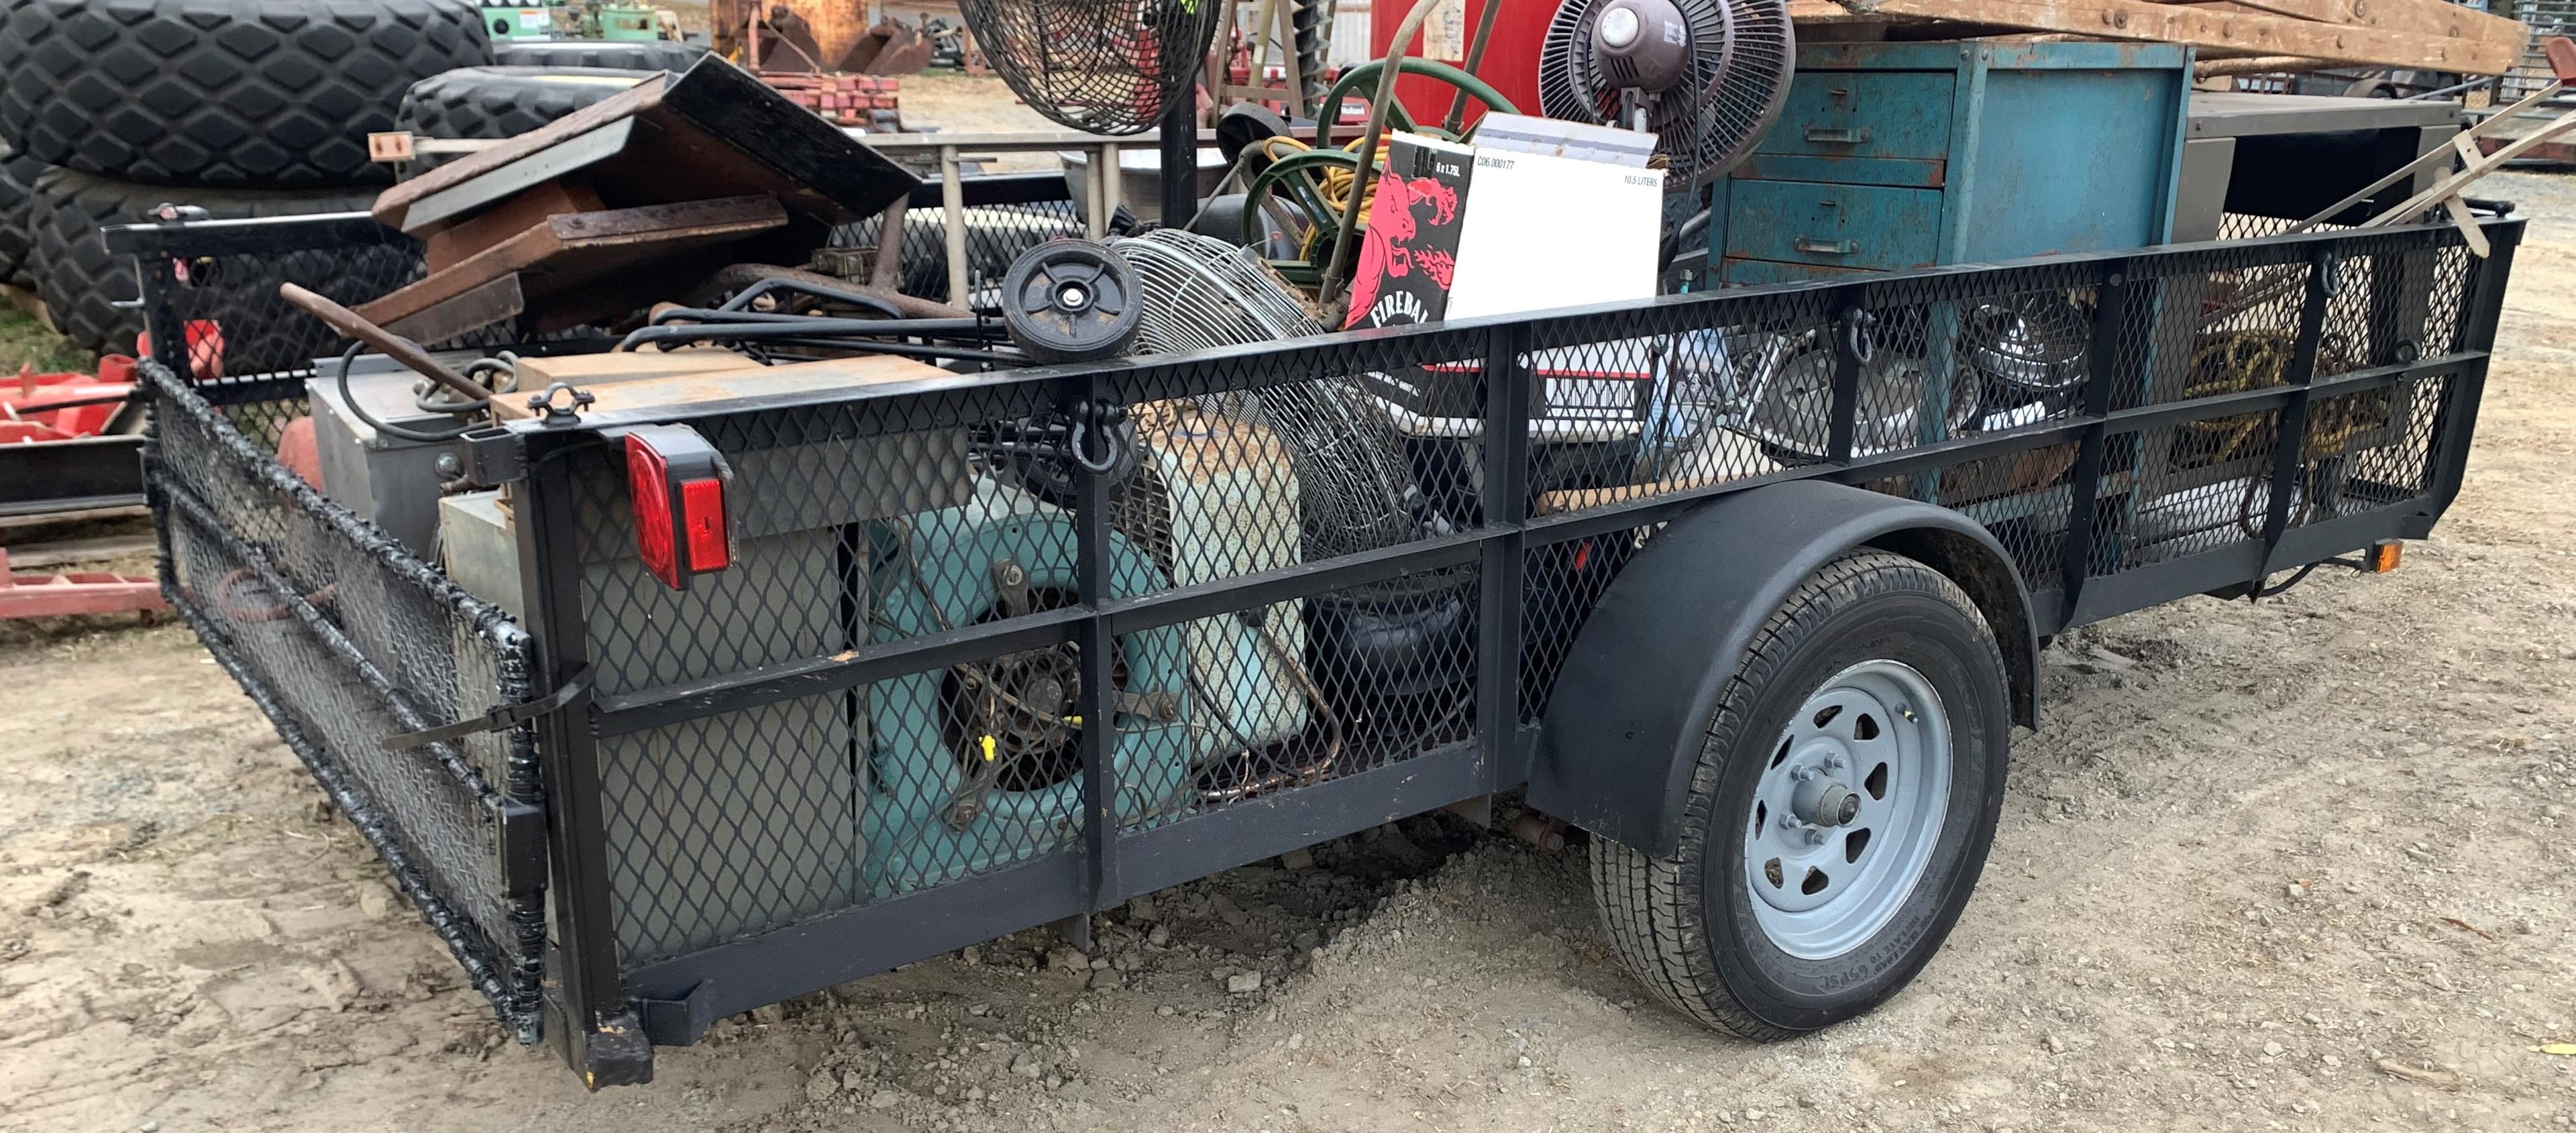 6 1/2 x 12 Utility Trailer - Contents Not Included